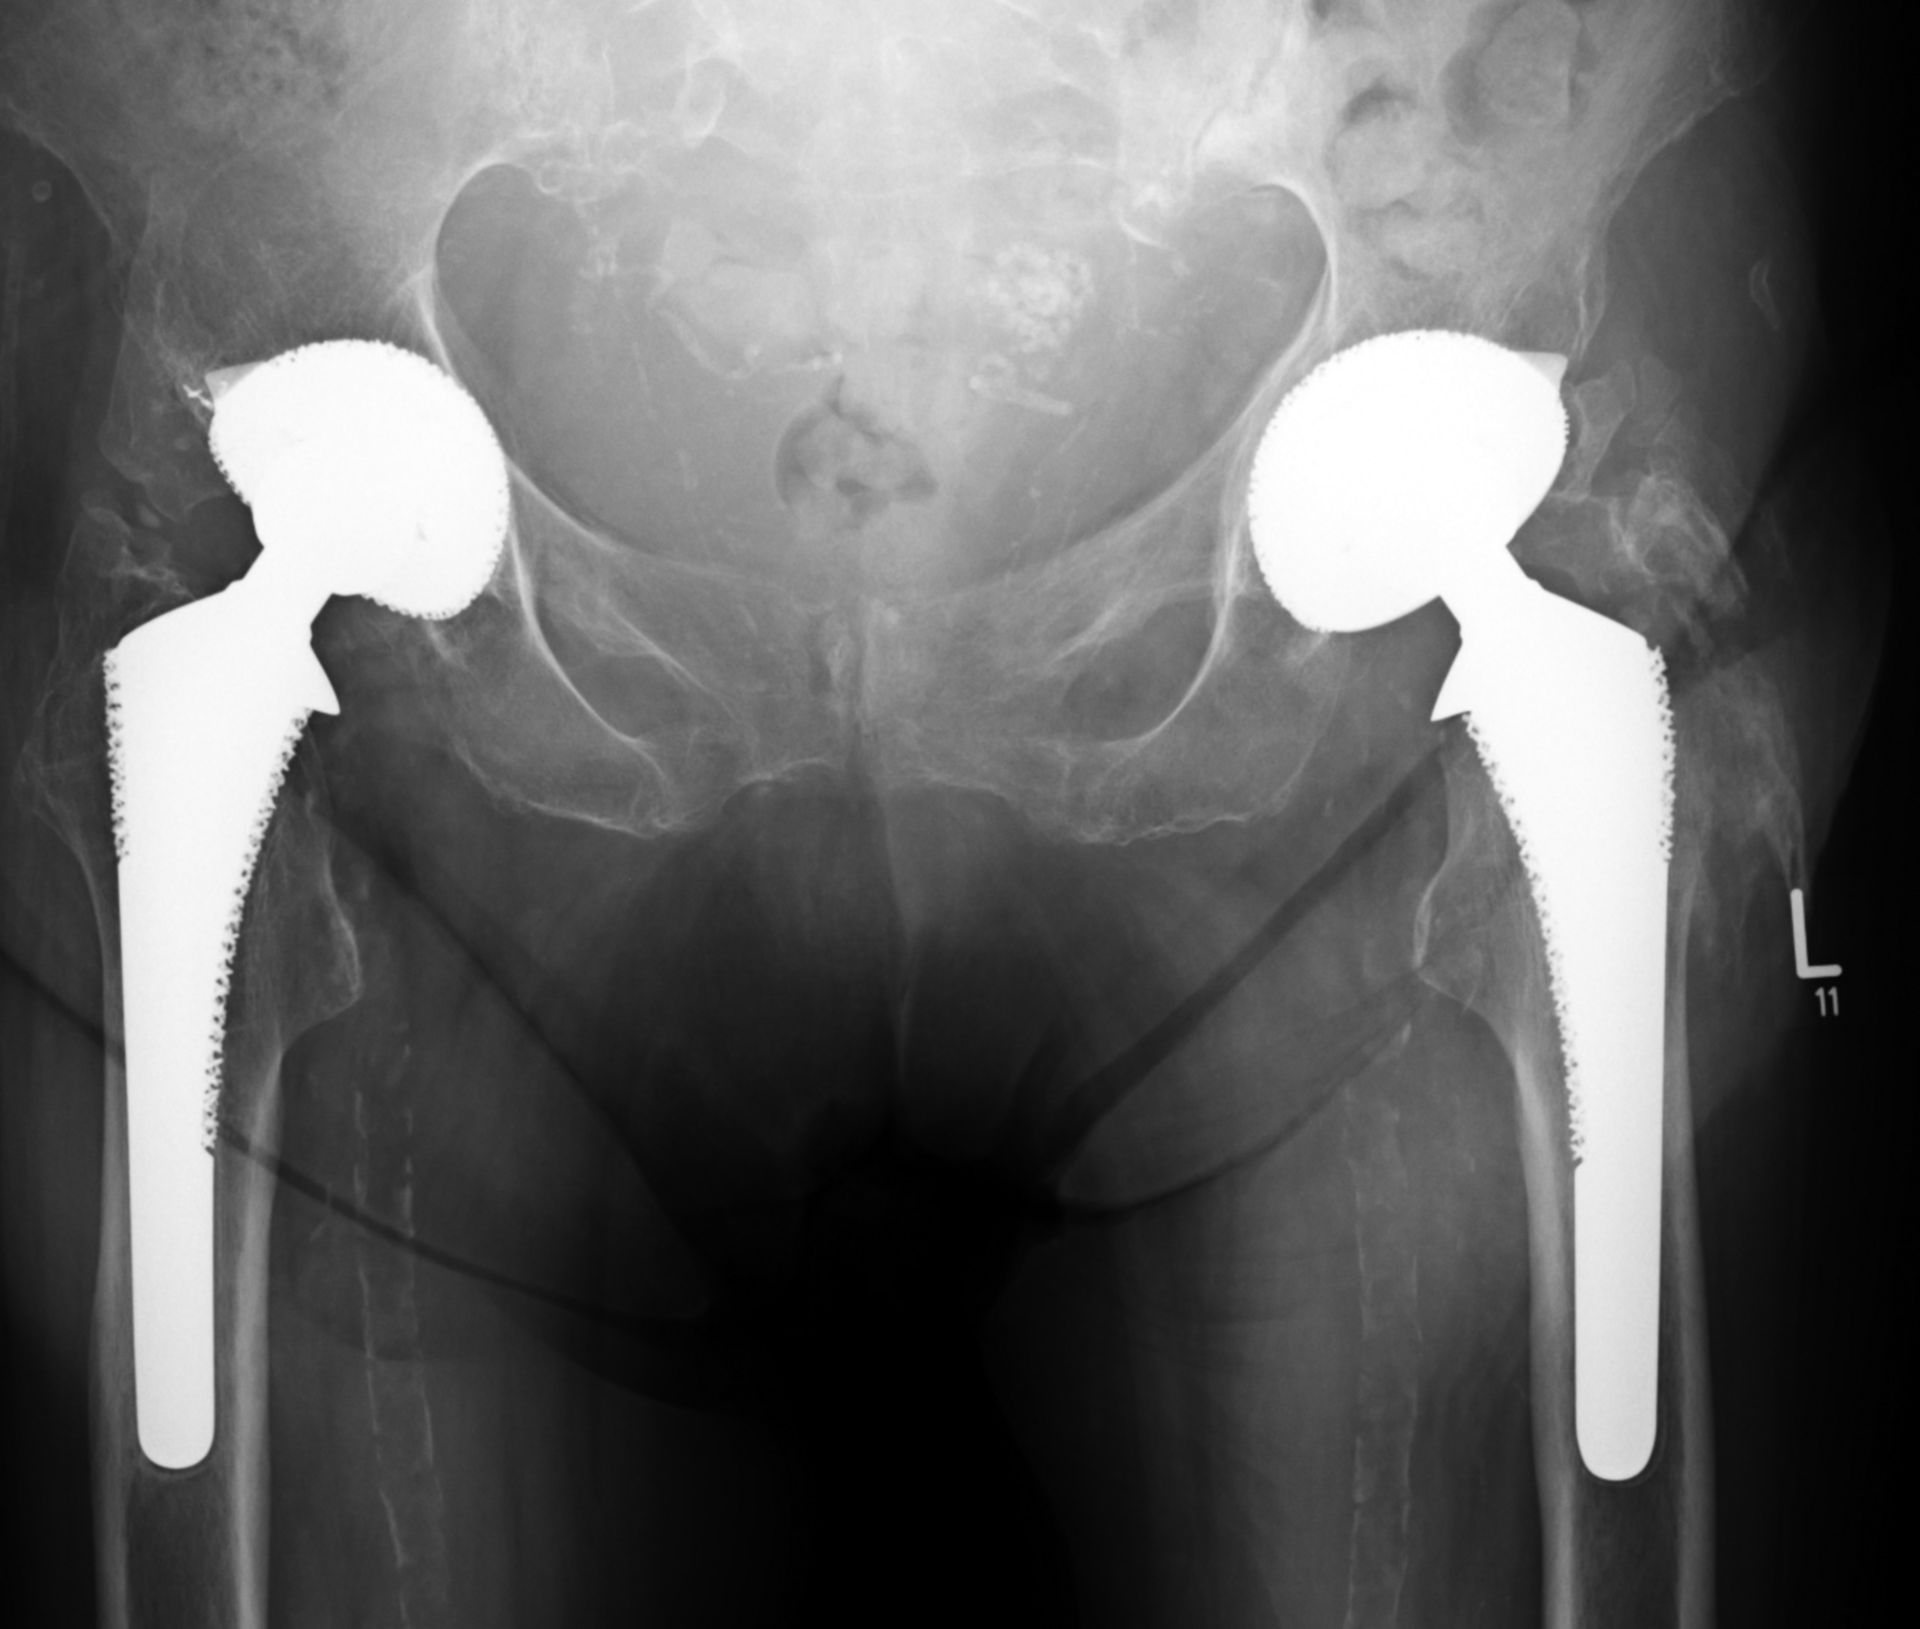 Osteoporosis of the hip - bilateral total hip replacement